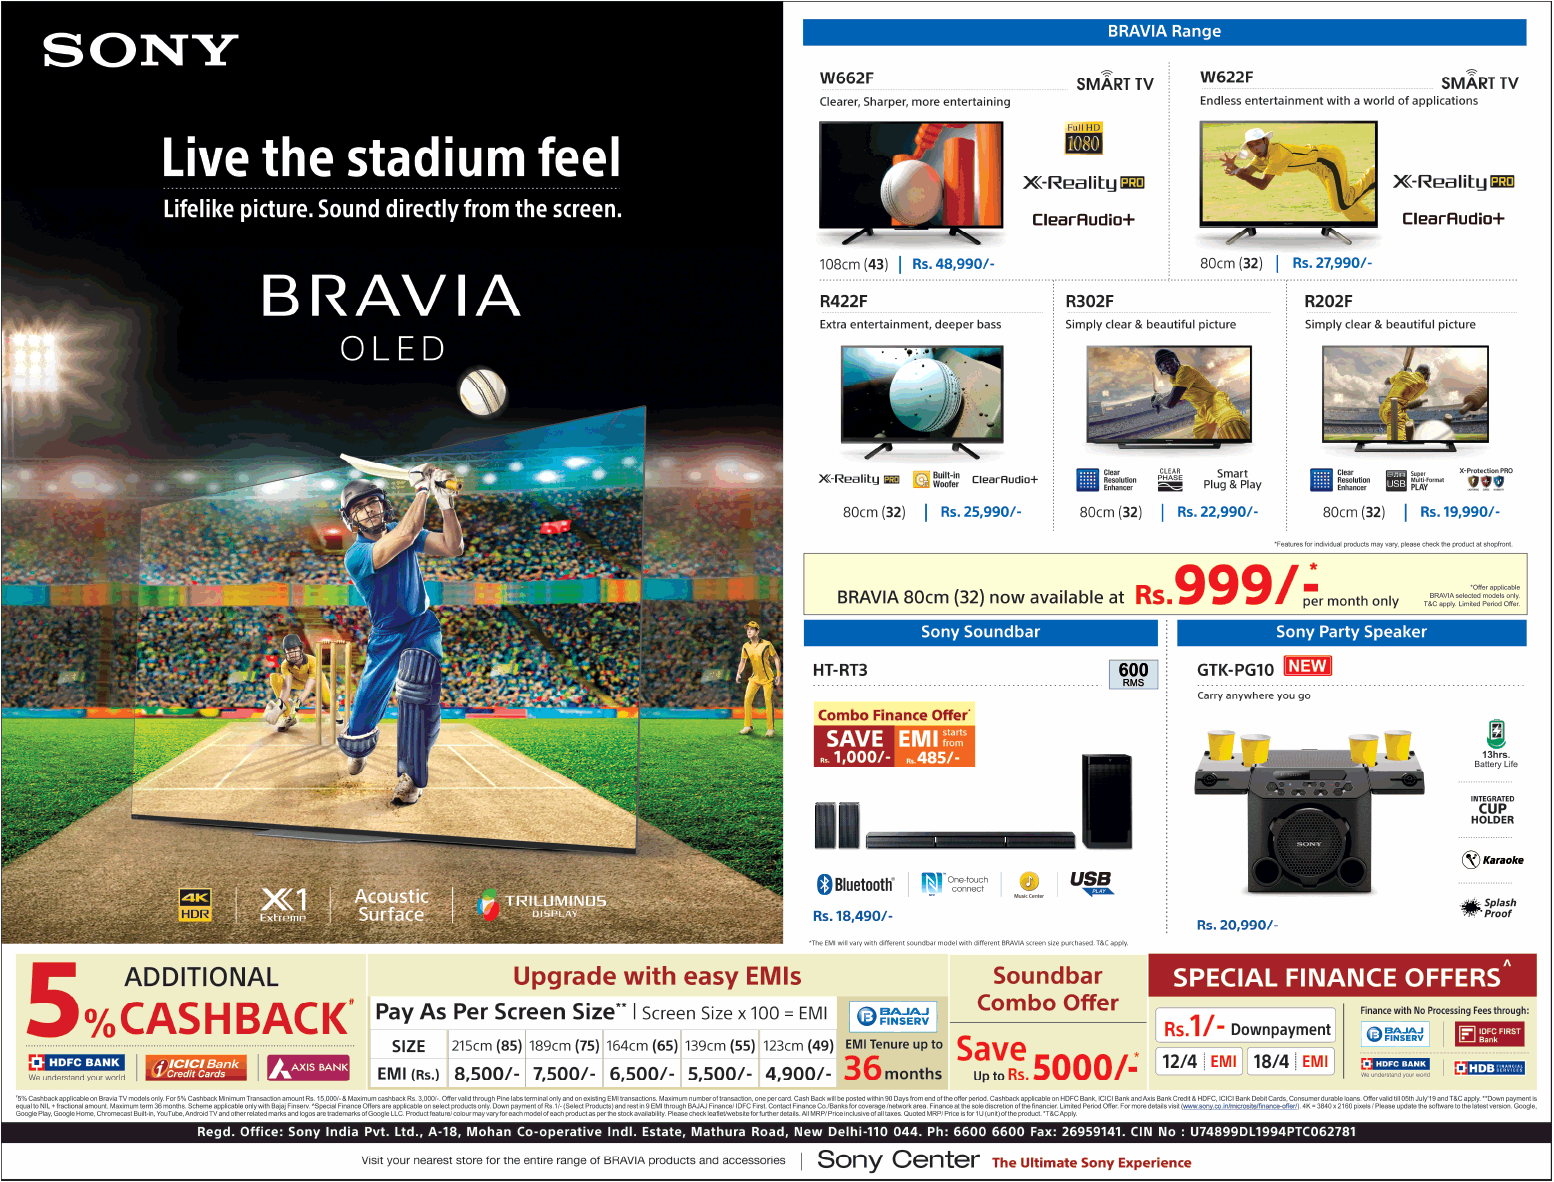 sony-bravia-oled-live-the-stadium-feel-ad-chennai-times-23-06-2019.png